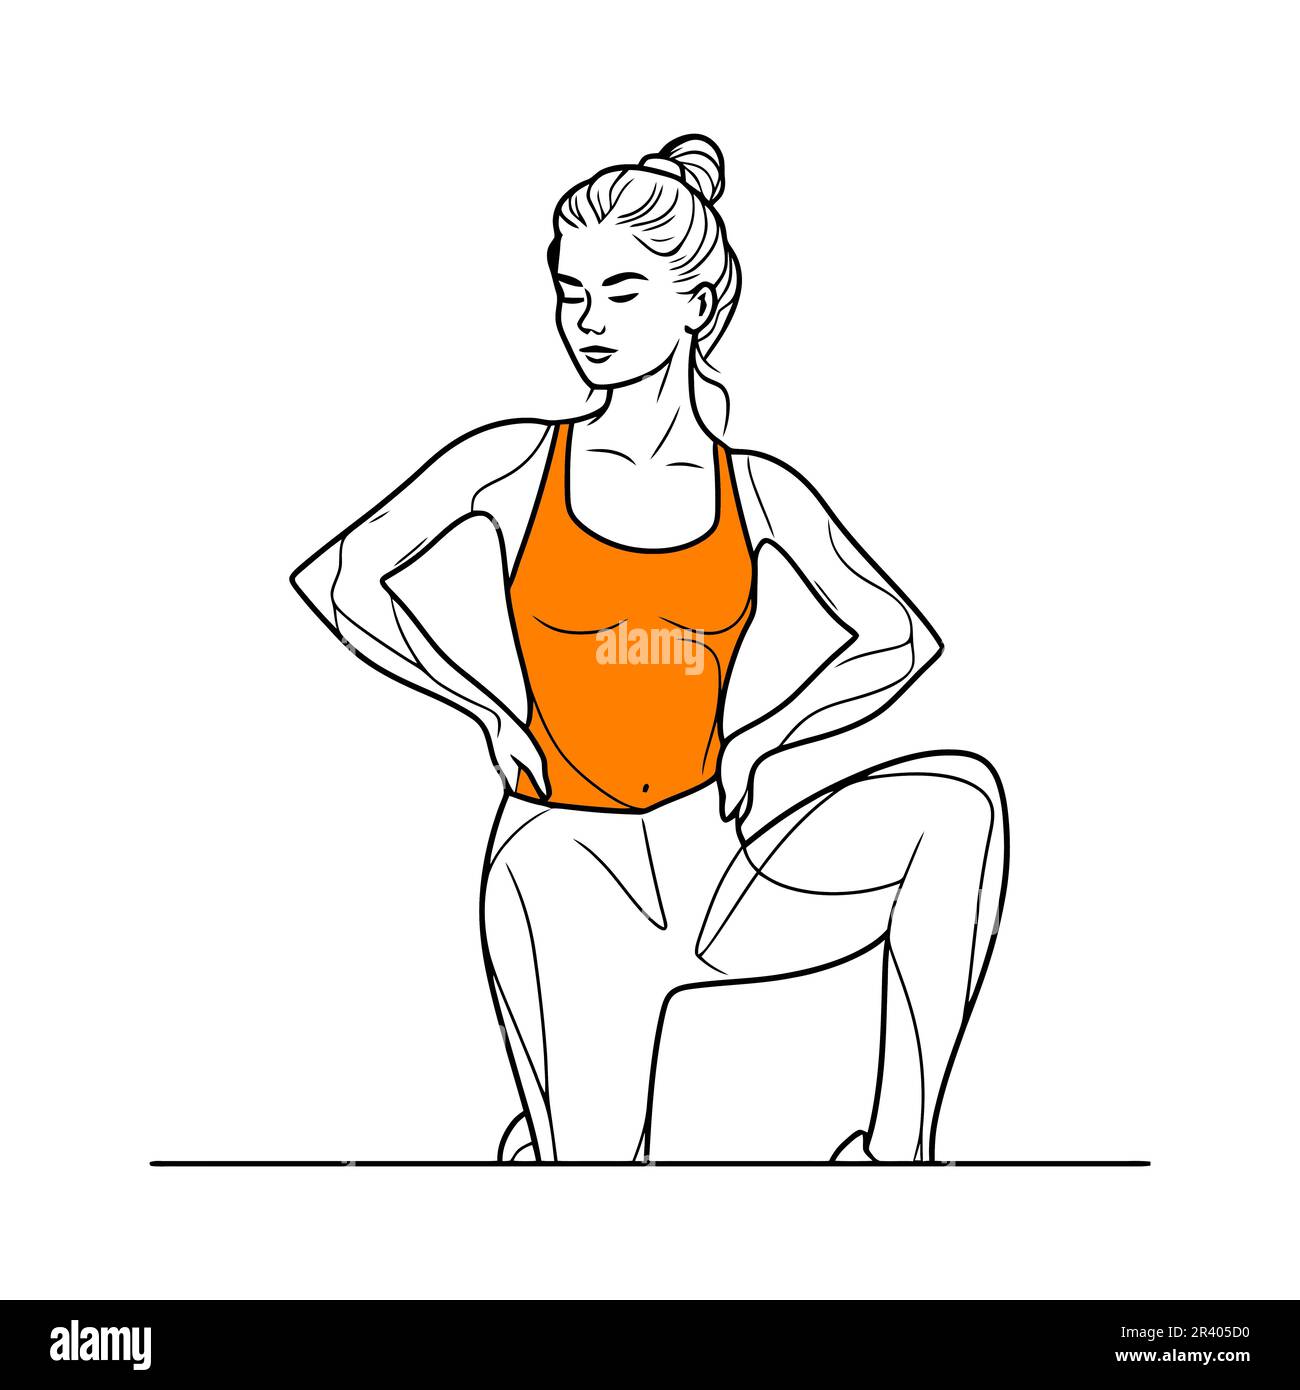 Sleek and Striking: Black and White Fitness Woman Illustration in the World of Line Art Stock Photo